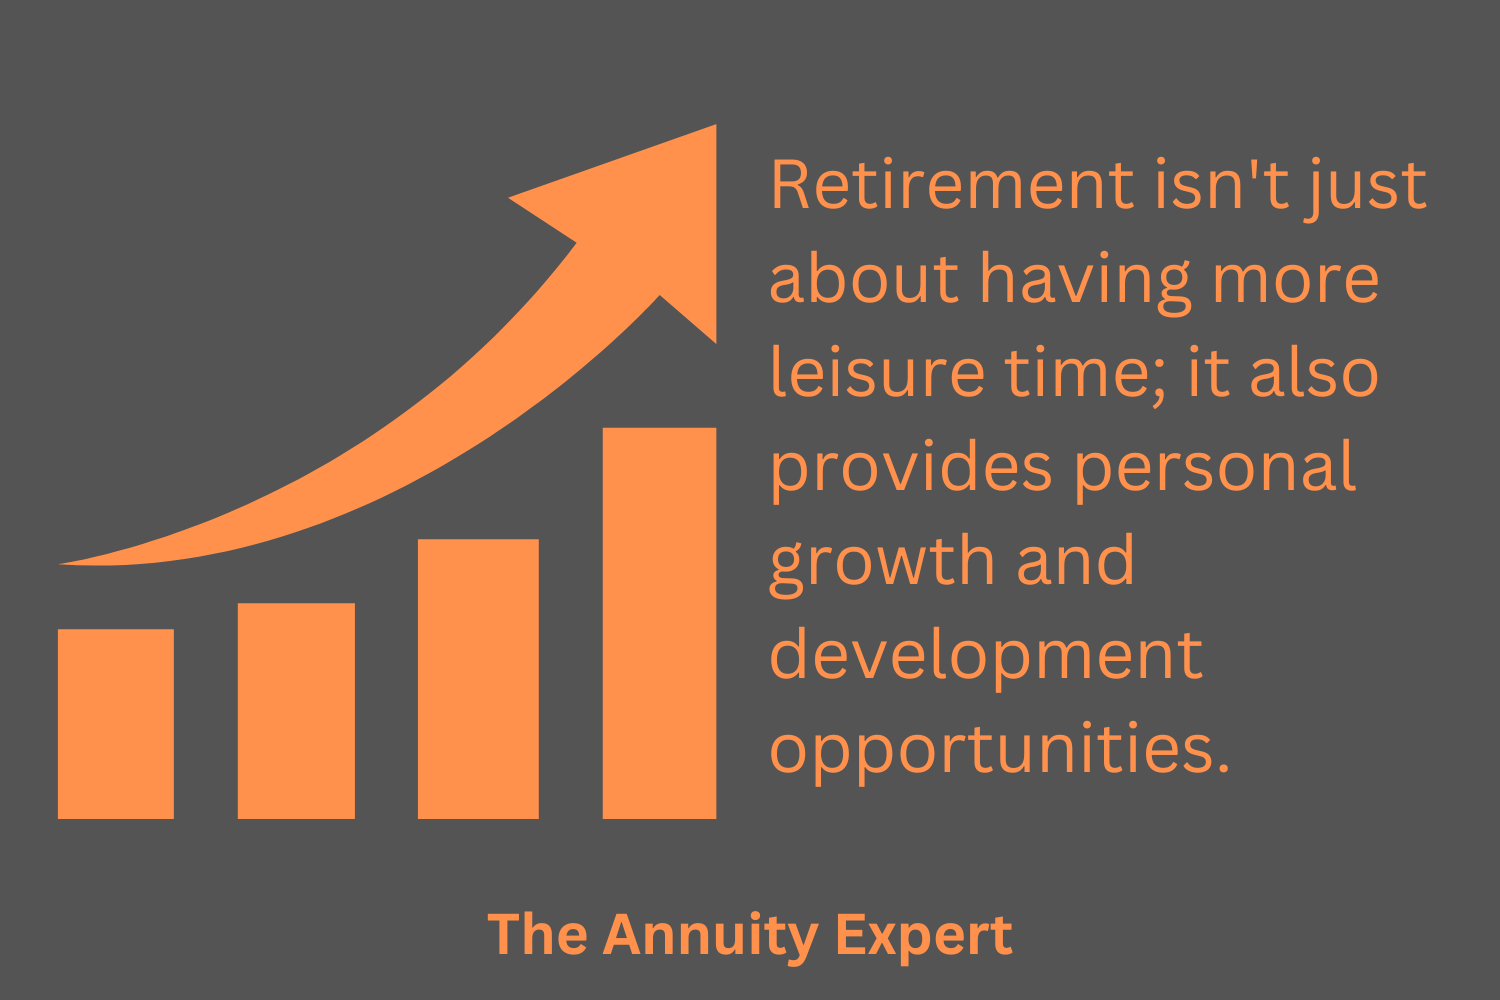 What Is The True Meaning Of Retirement?